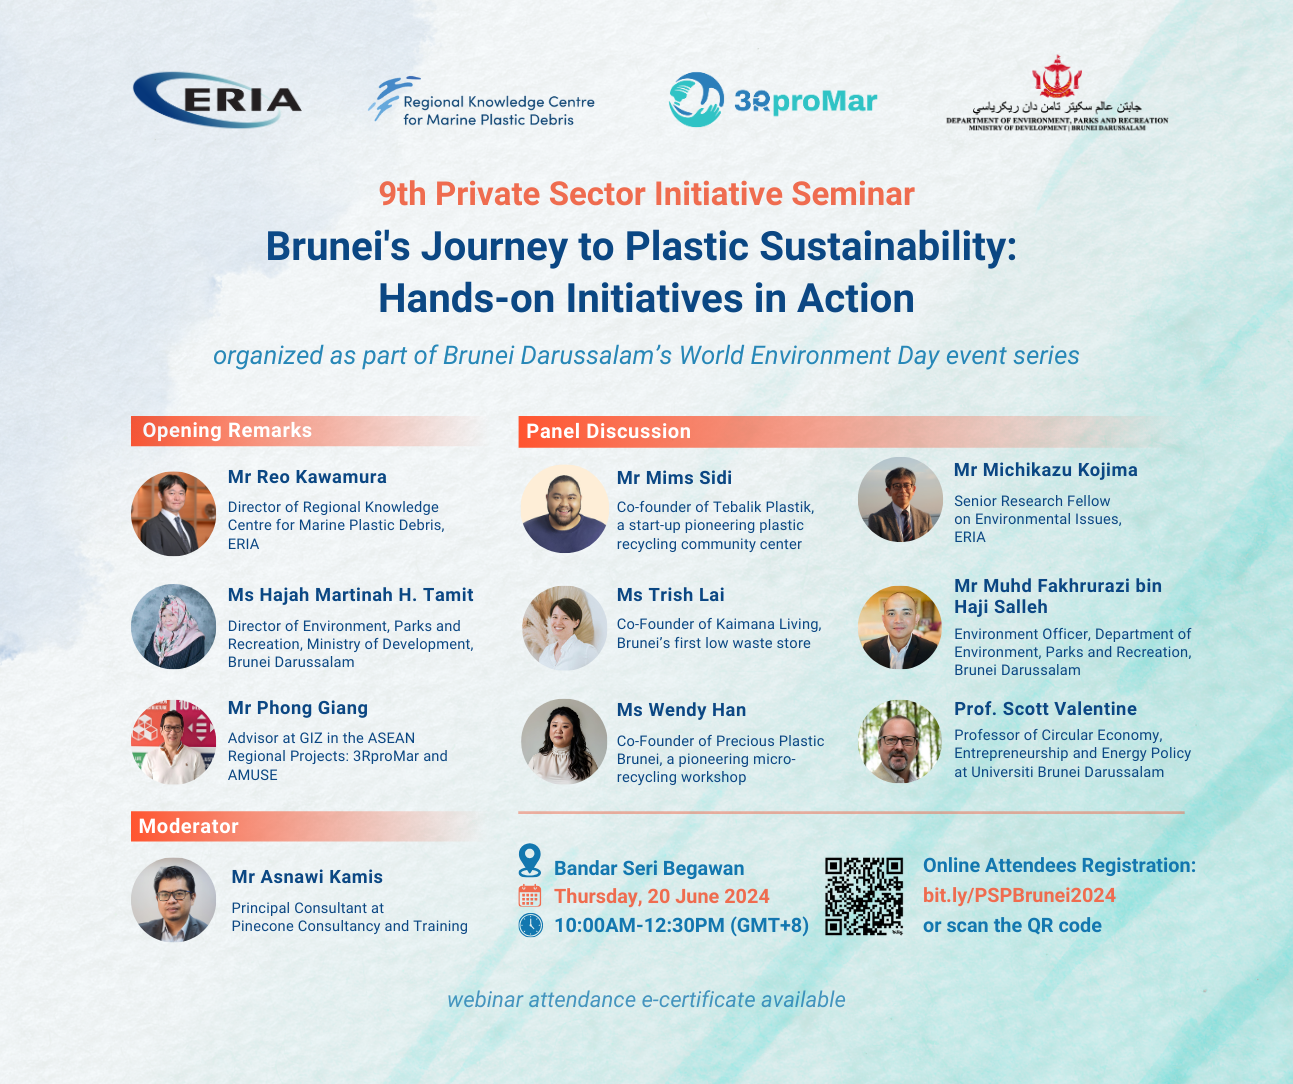 Private Sector Initiatives to Reduce Marine Plastics: Brunei's Journey to Plastic Sustainability (Hands-on Initiatives in Action)